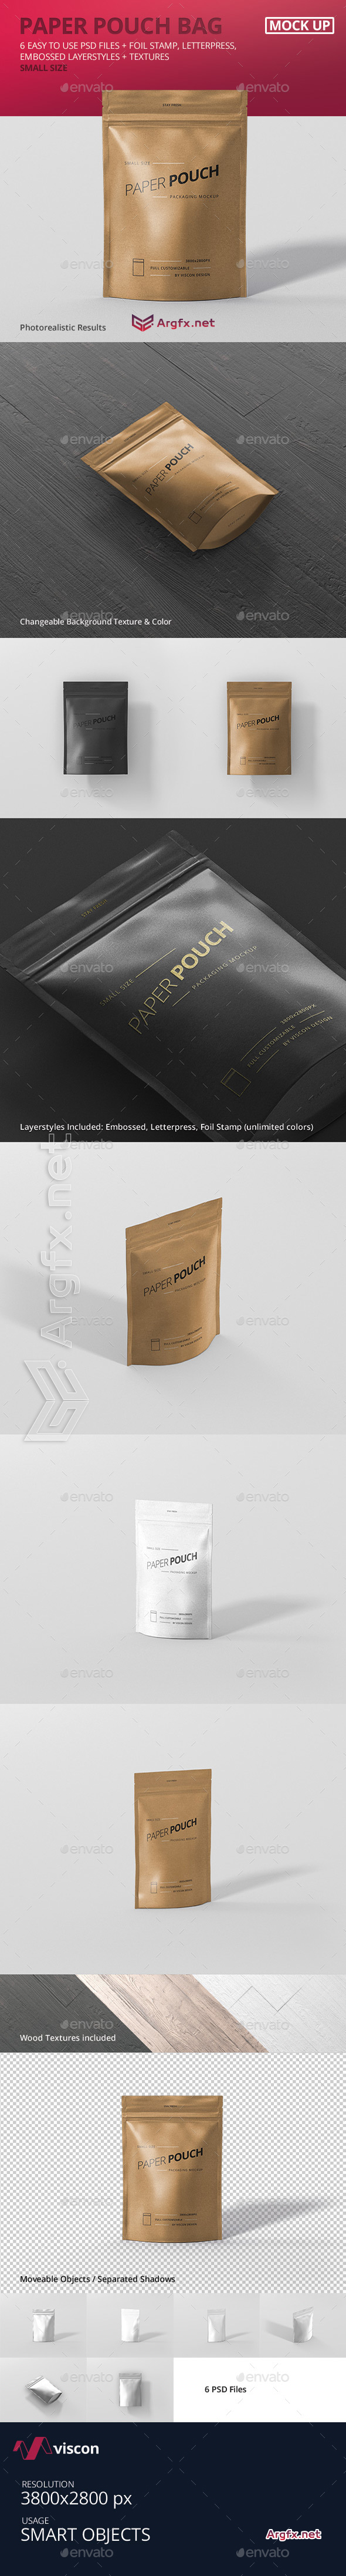 Paper Pouch Bag Mockup Small Size 19389708